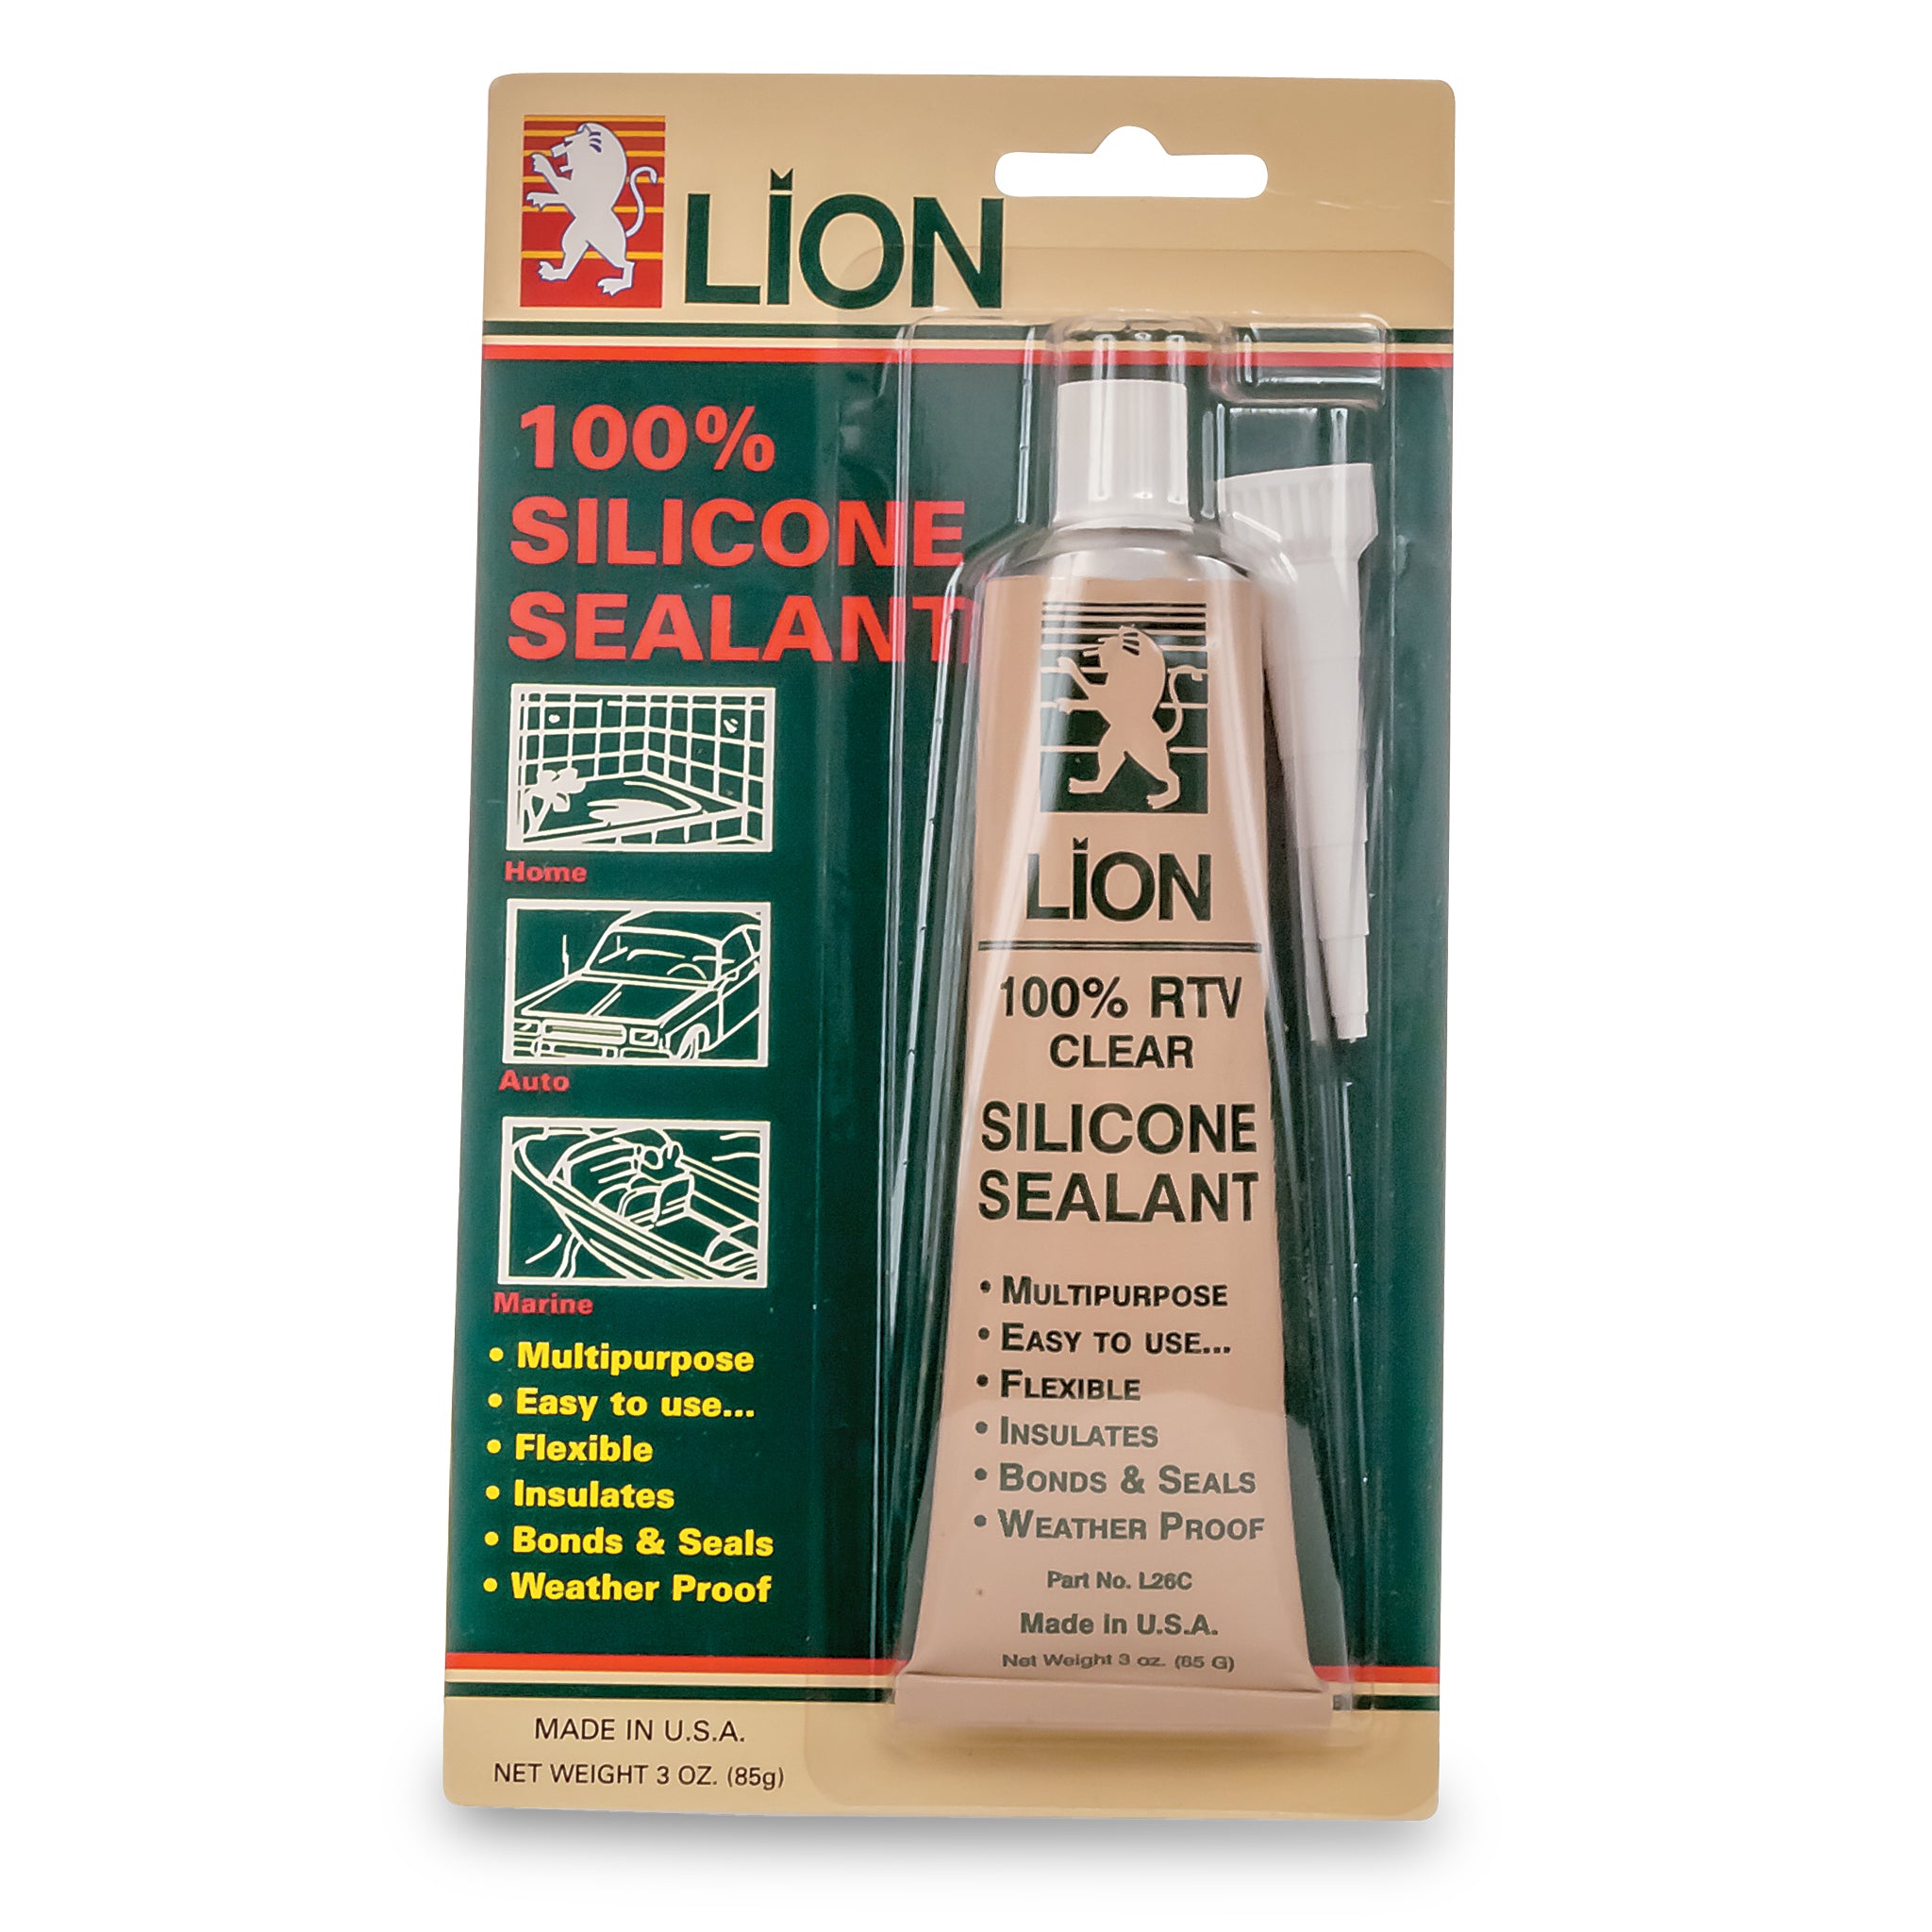 Premium 100% RTV Silicone Sealant (Available in Multiple Colors)